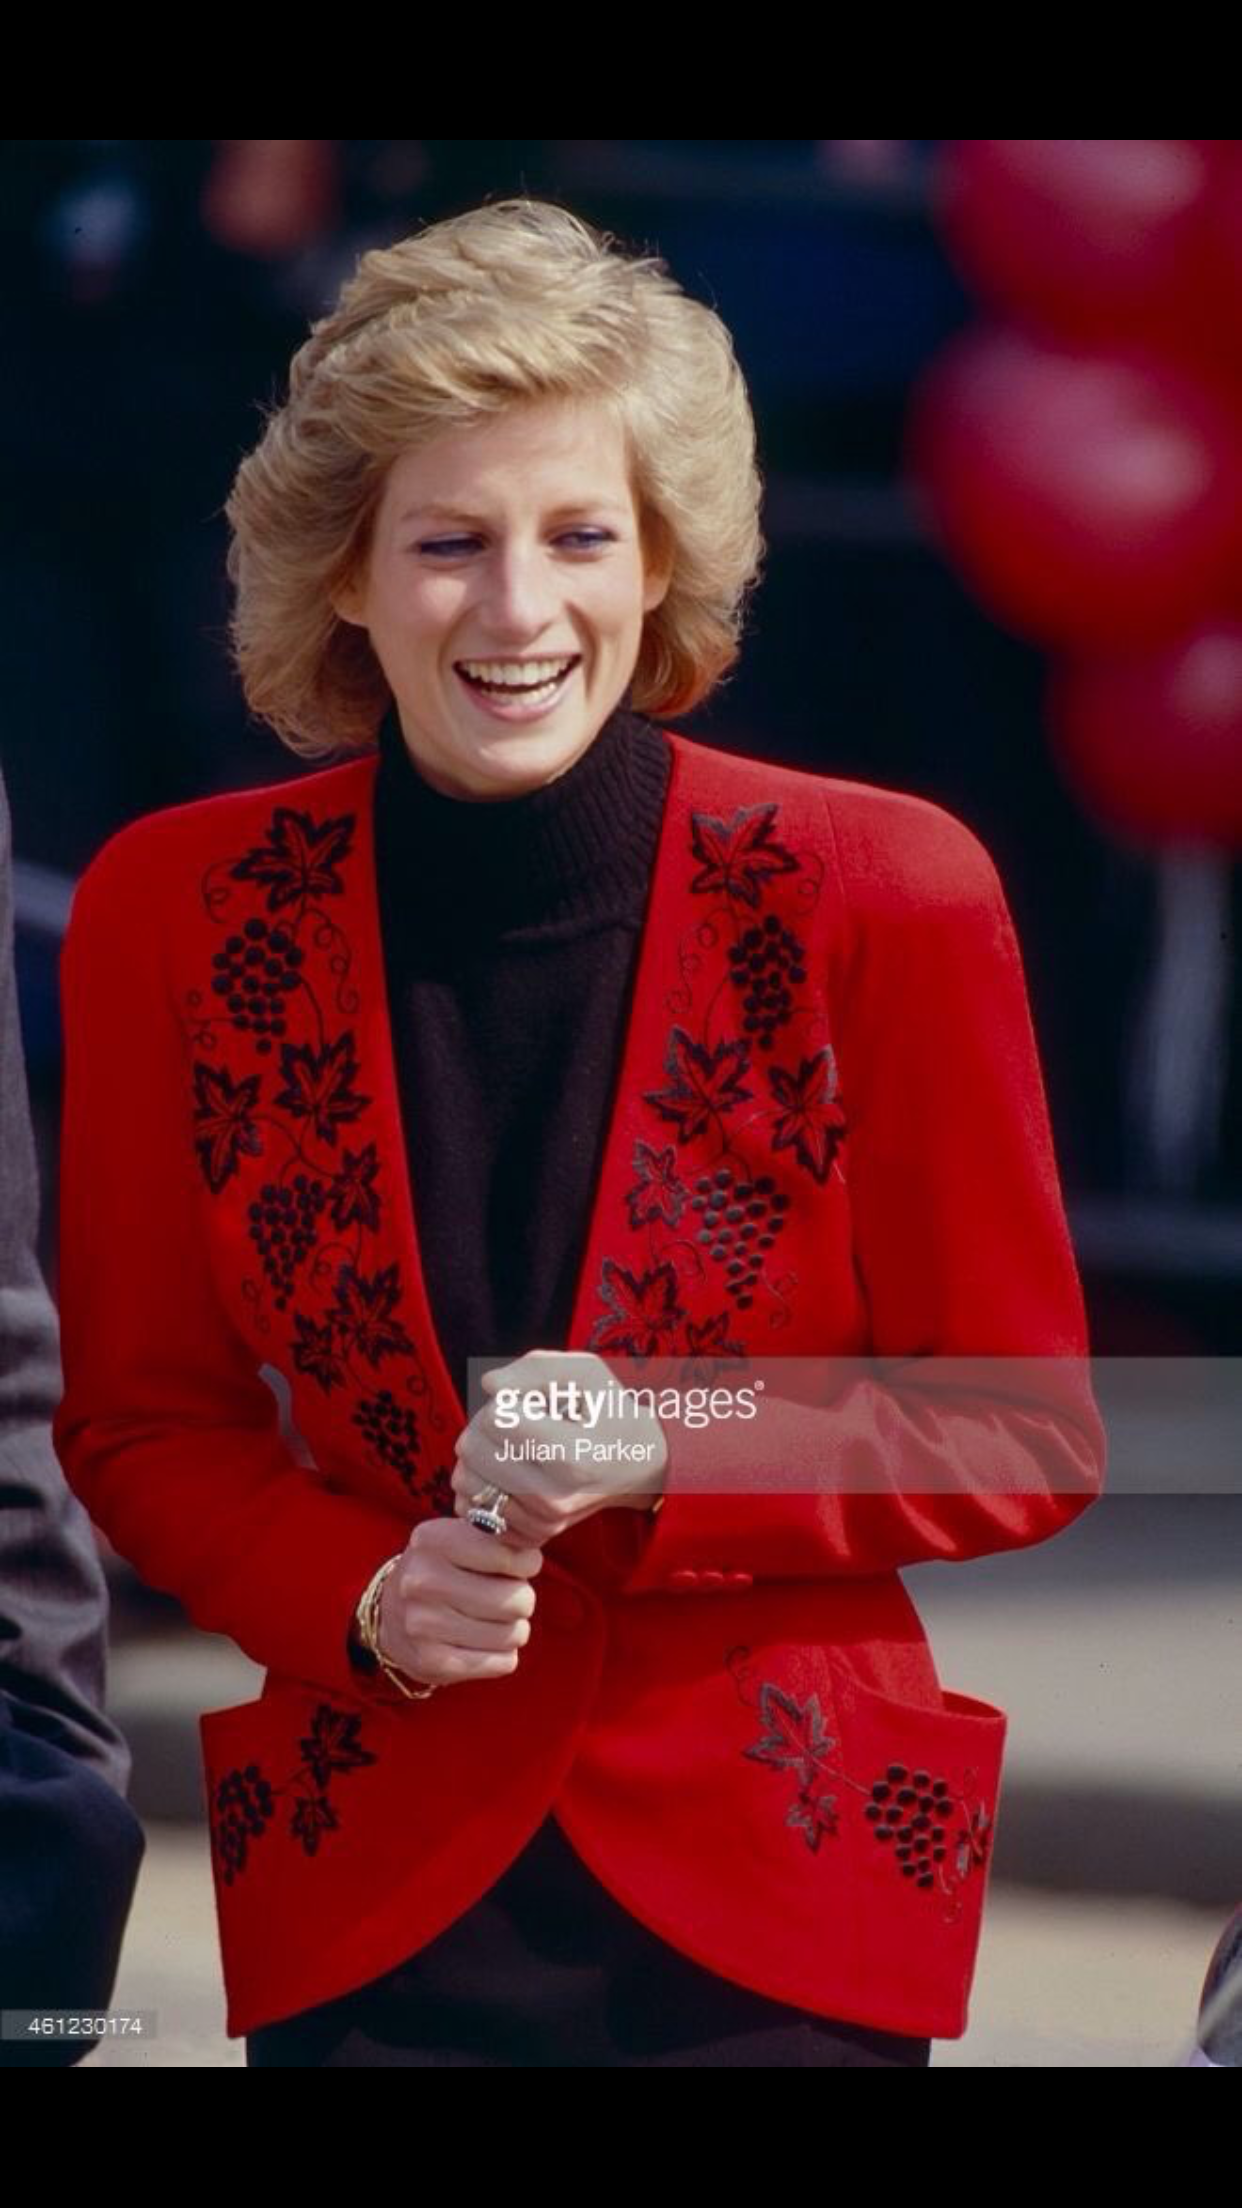 Princess Diana's dazzling smile and a hearty laugh. Not to mention ...